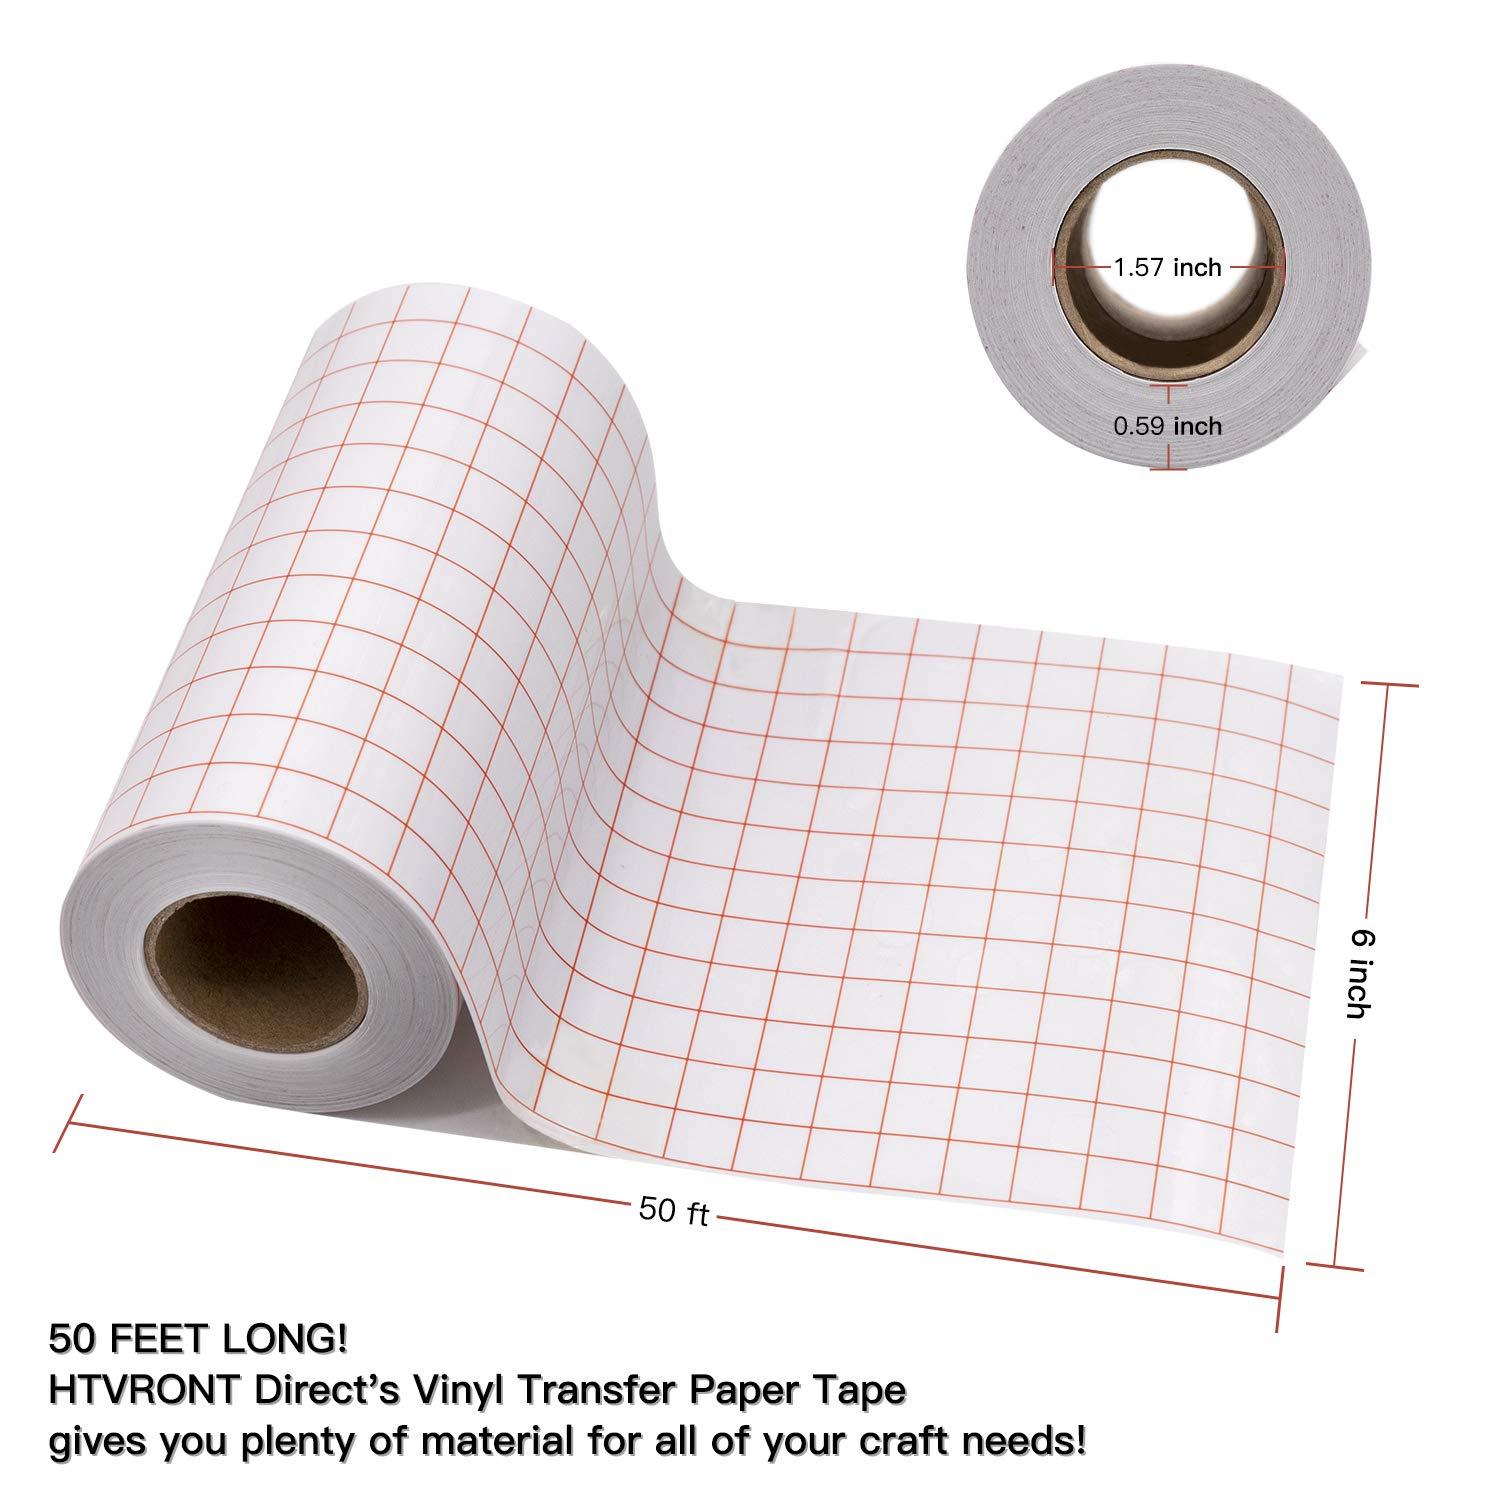  Clear Vinyl Transfer Paper Tape Roll 6 x 50 Feet Clear w/Red  Alignment Grid - Application Transfer Tape Perfect for Self Adhesive Vinyl  for Signs Stickers Decals Walls Doors & Windows 